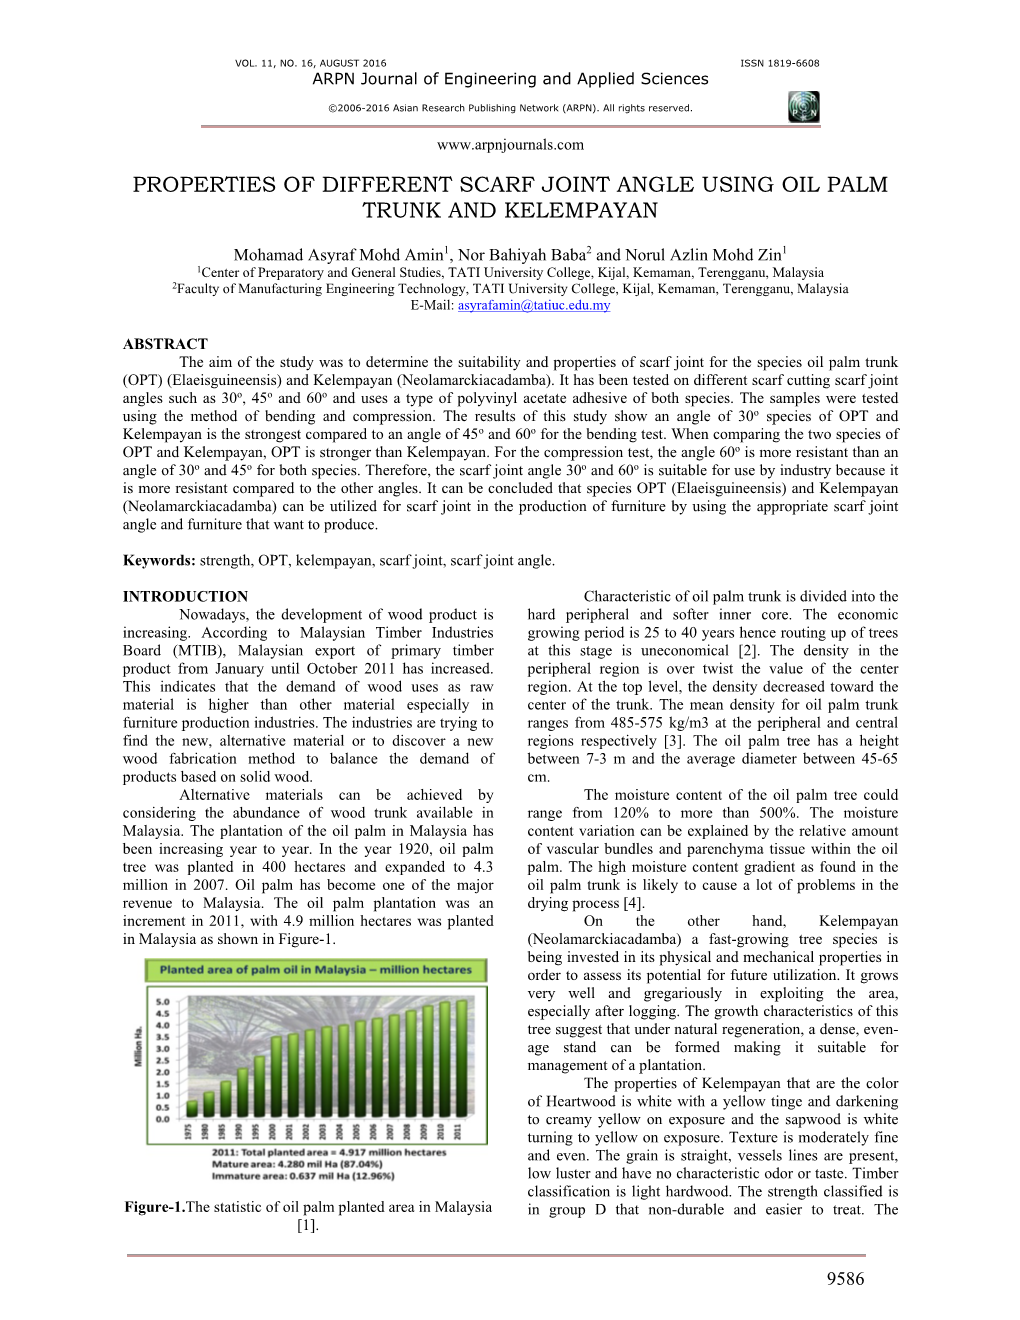 Properties of Different Scarf Joint Angle Using Oil Palm Trunk and Kelempayan